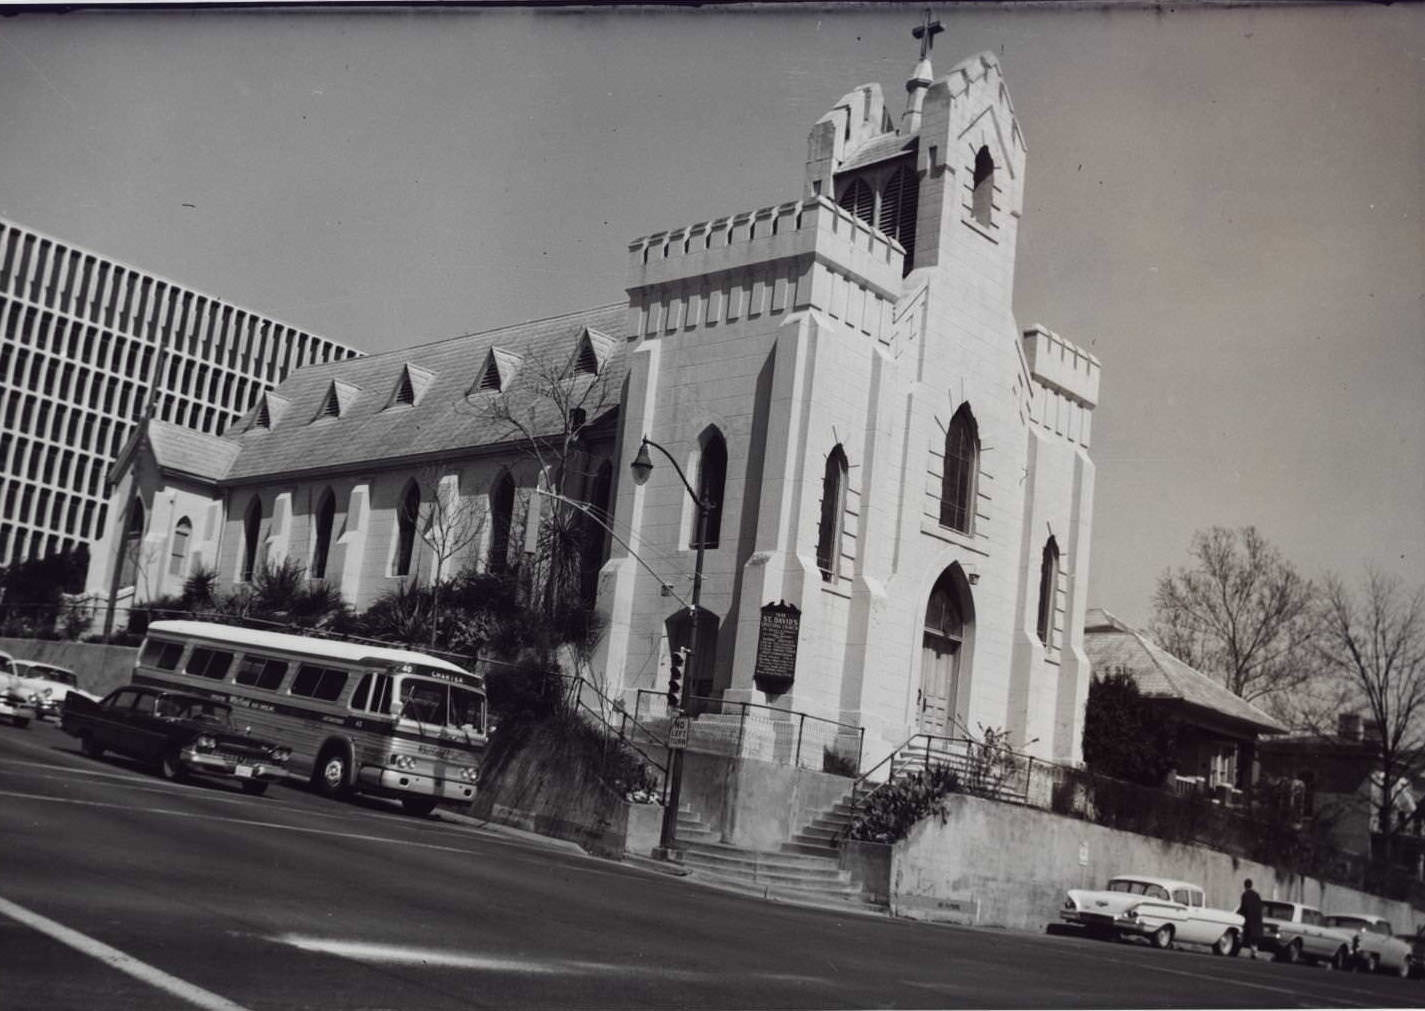 Exterior of St. David's Episcopal Church taken from across the street at the intersection of San Jacinto and East 7th, 1965